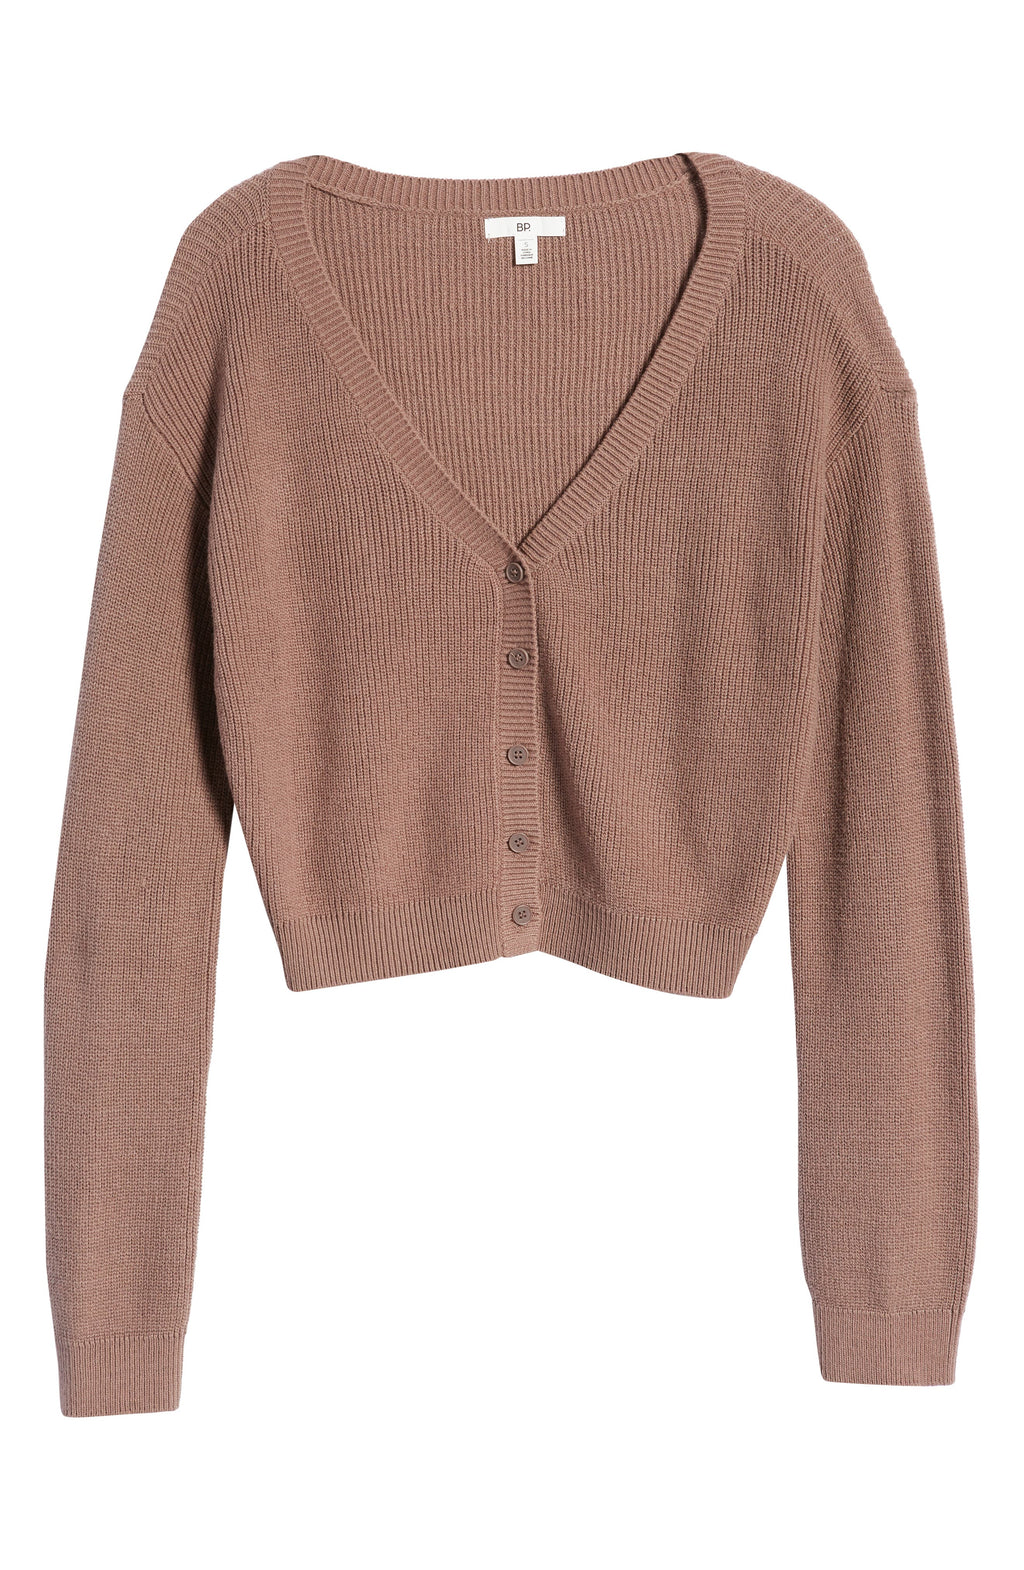 BP. Ribbed Cotton Blend Cardigan, Alternate, color, BROWN TAUPE